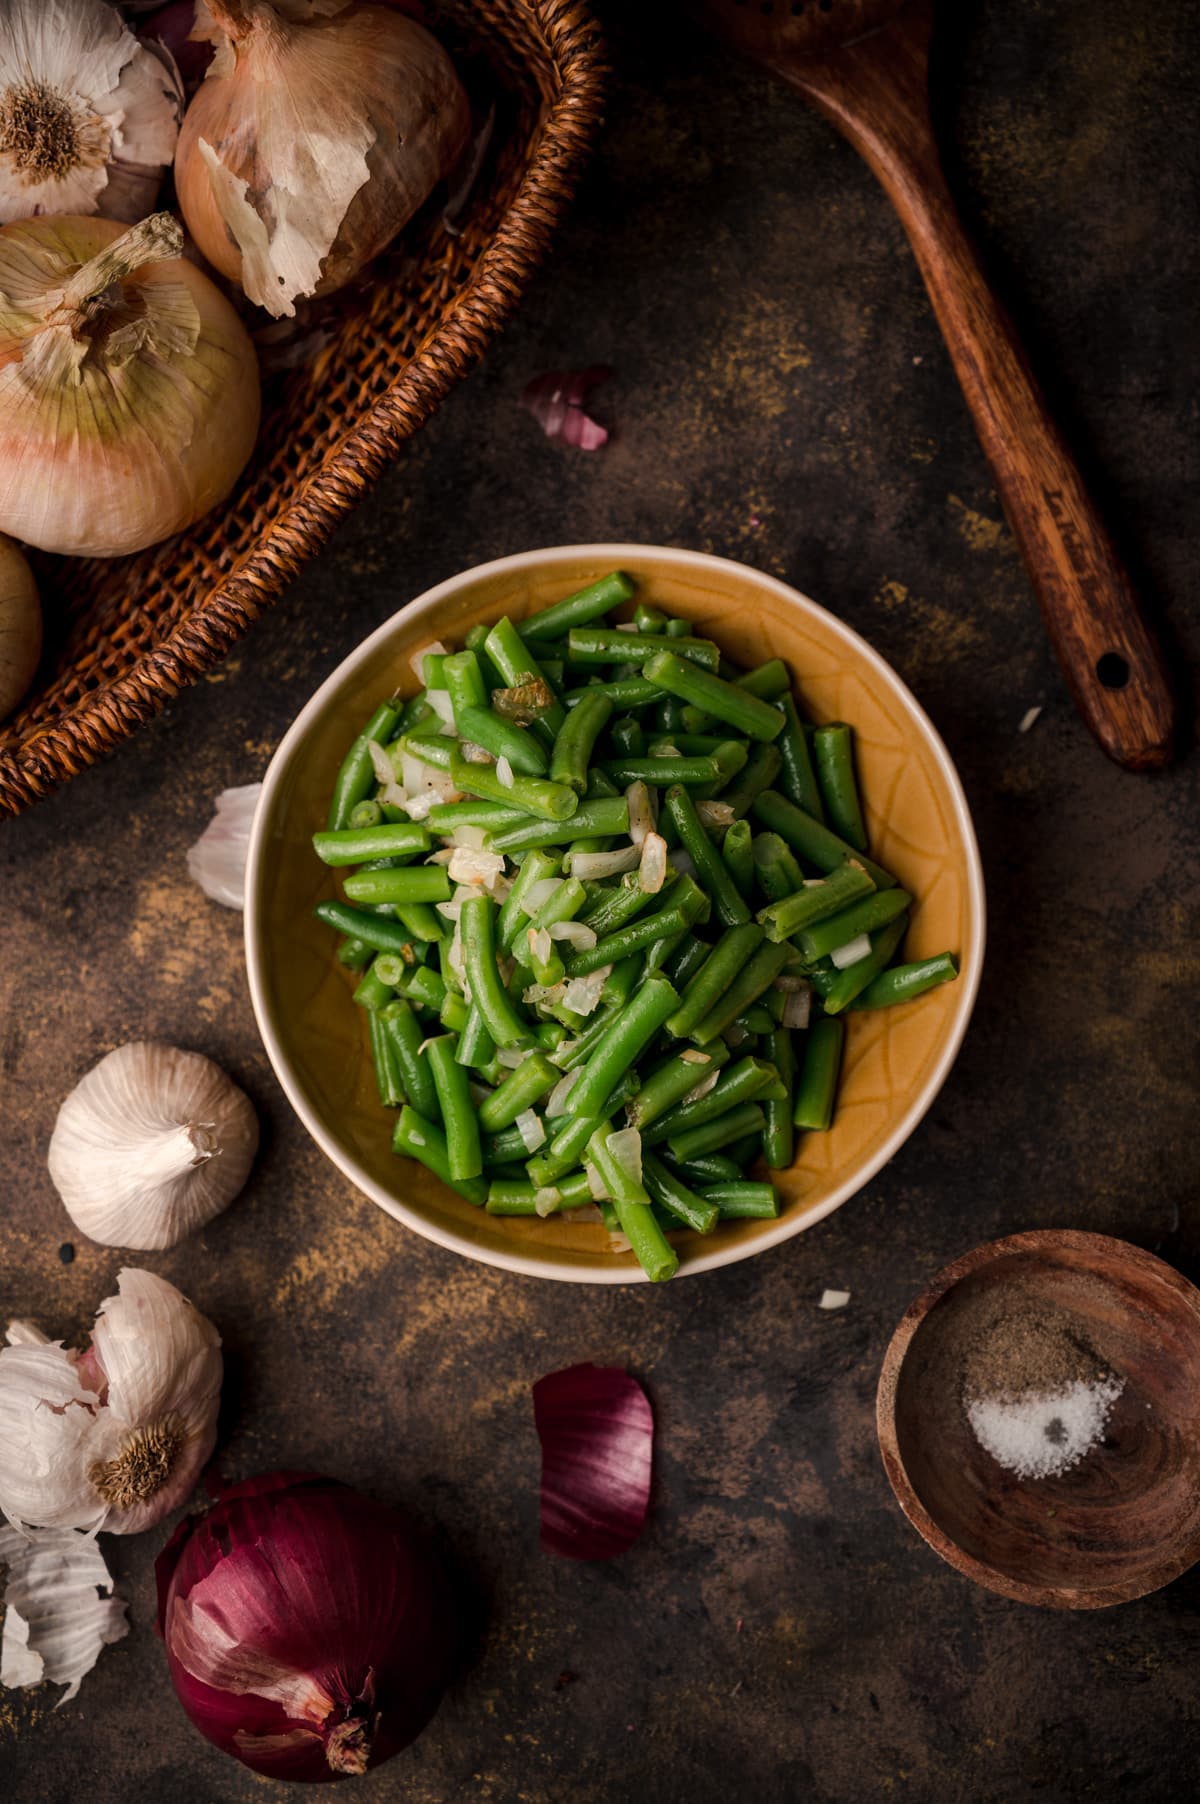 Straight down image of cooked green beans in a ceramic bowl with onions, garlic, and spices next to it.